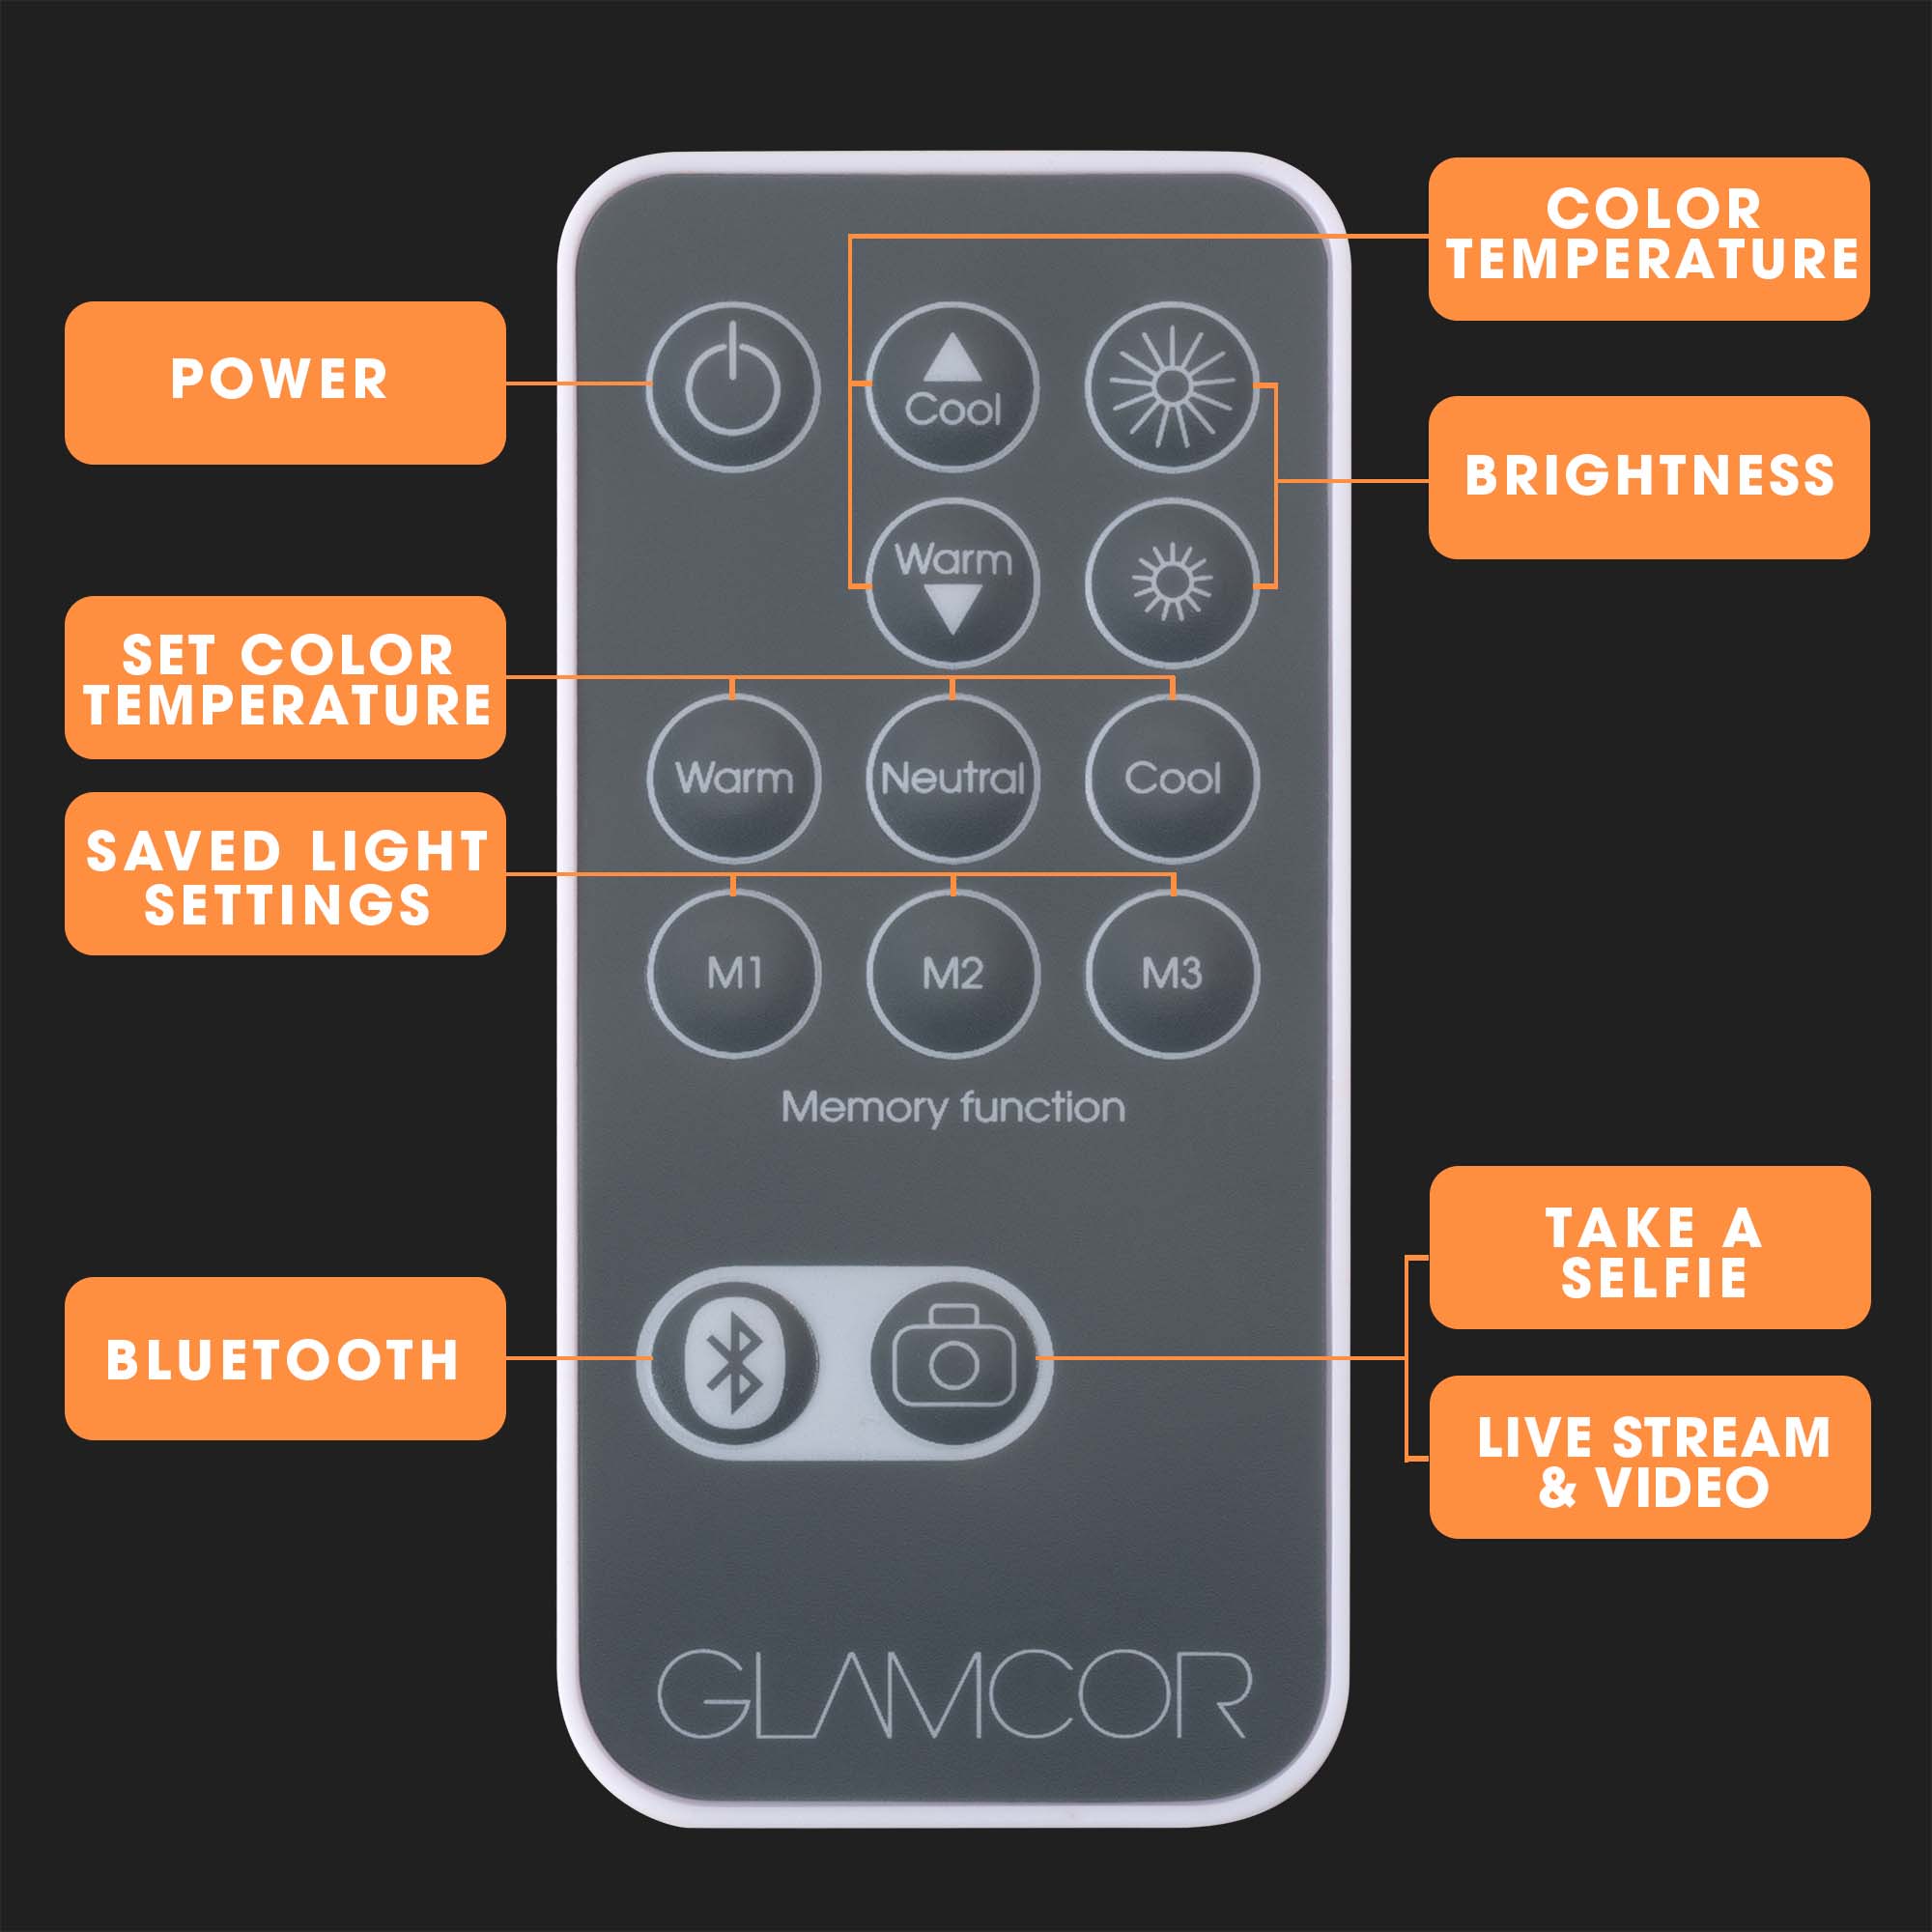 GLAMCOR Bluetooth Remote Replacement - GLAMCOR REPLACEMENTS GLAMCOR